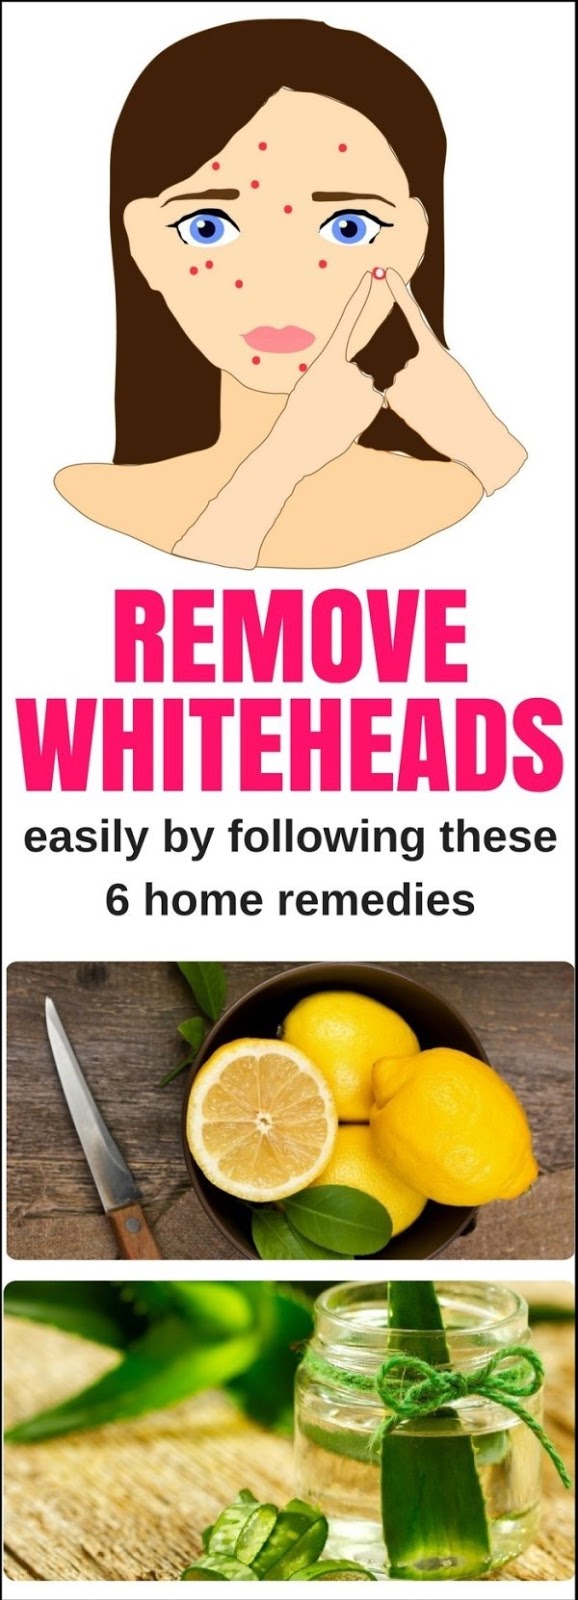 Remove Whiteheads Easily By Following These 6 Home Remedies